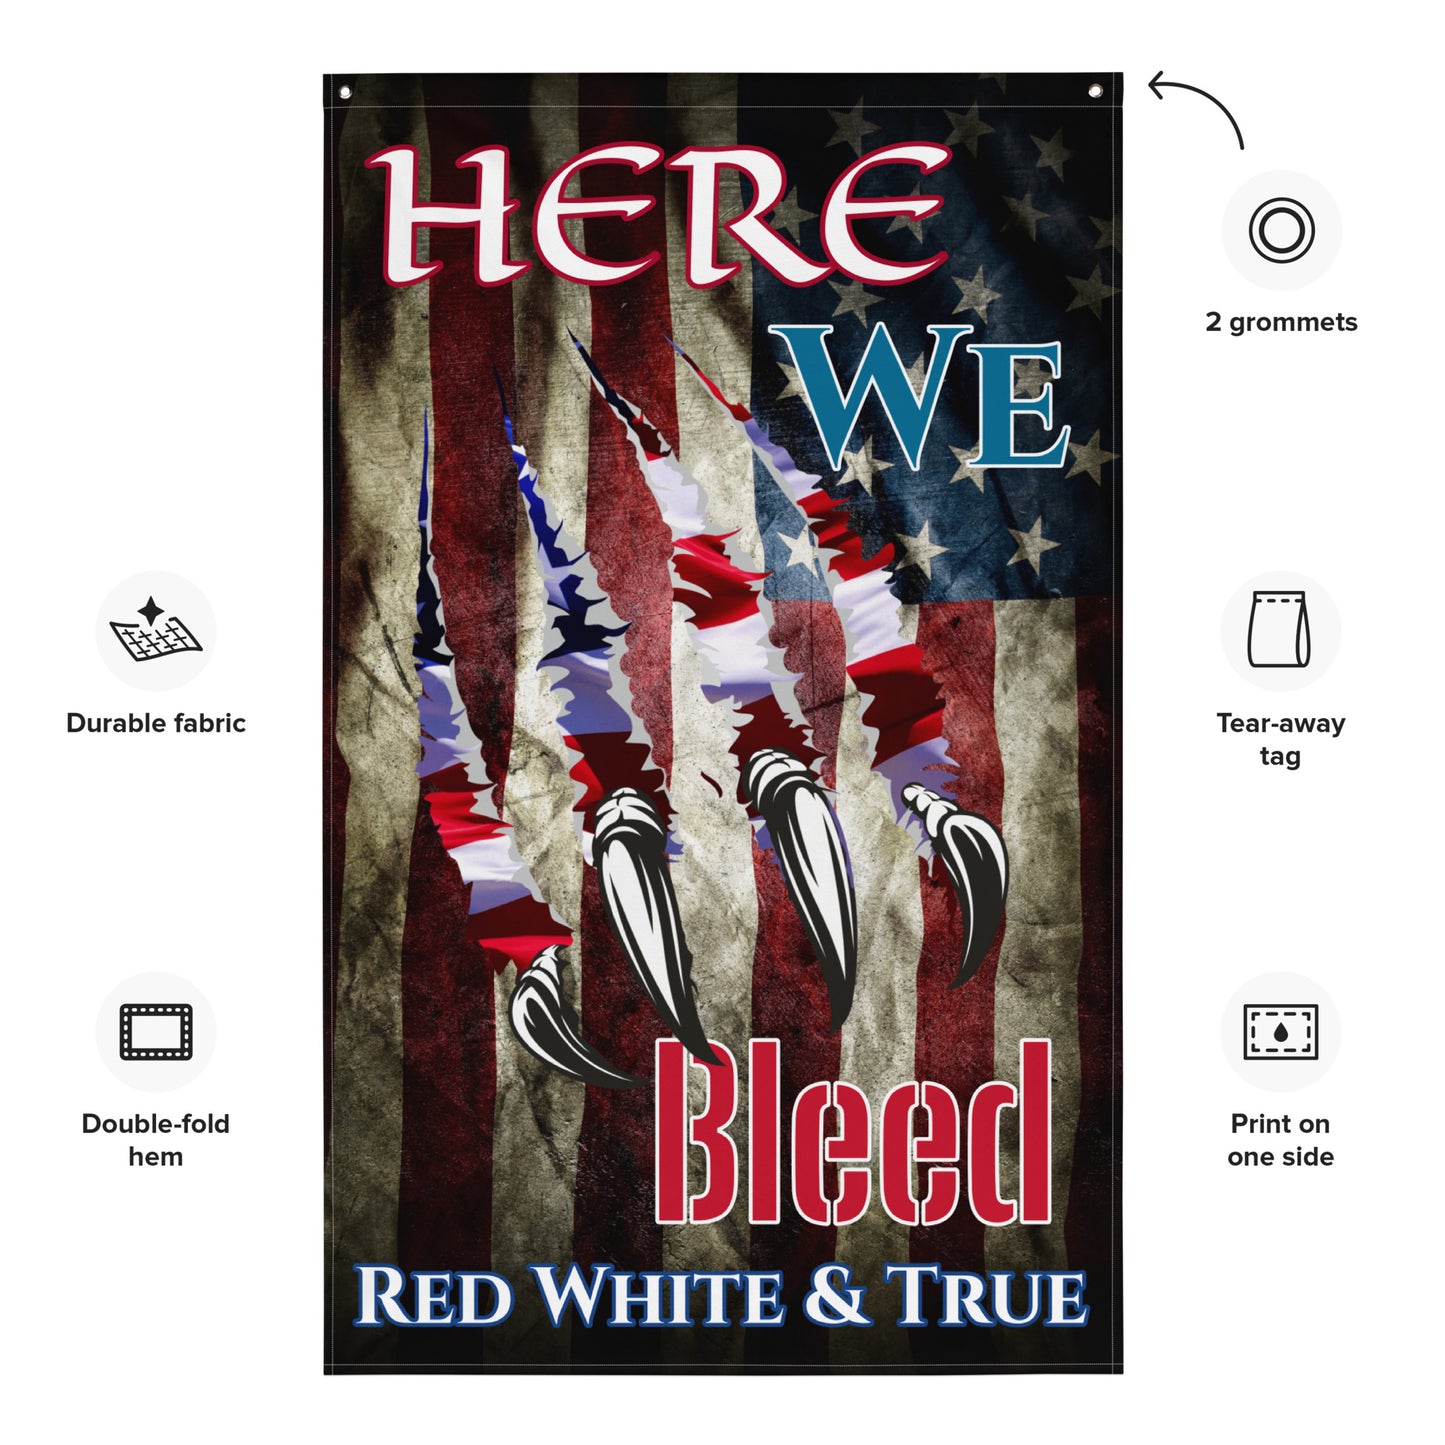 Here we bleed red white and true, American Flag style Patriot Flag